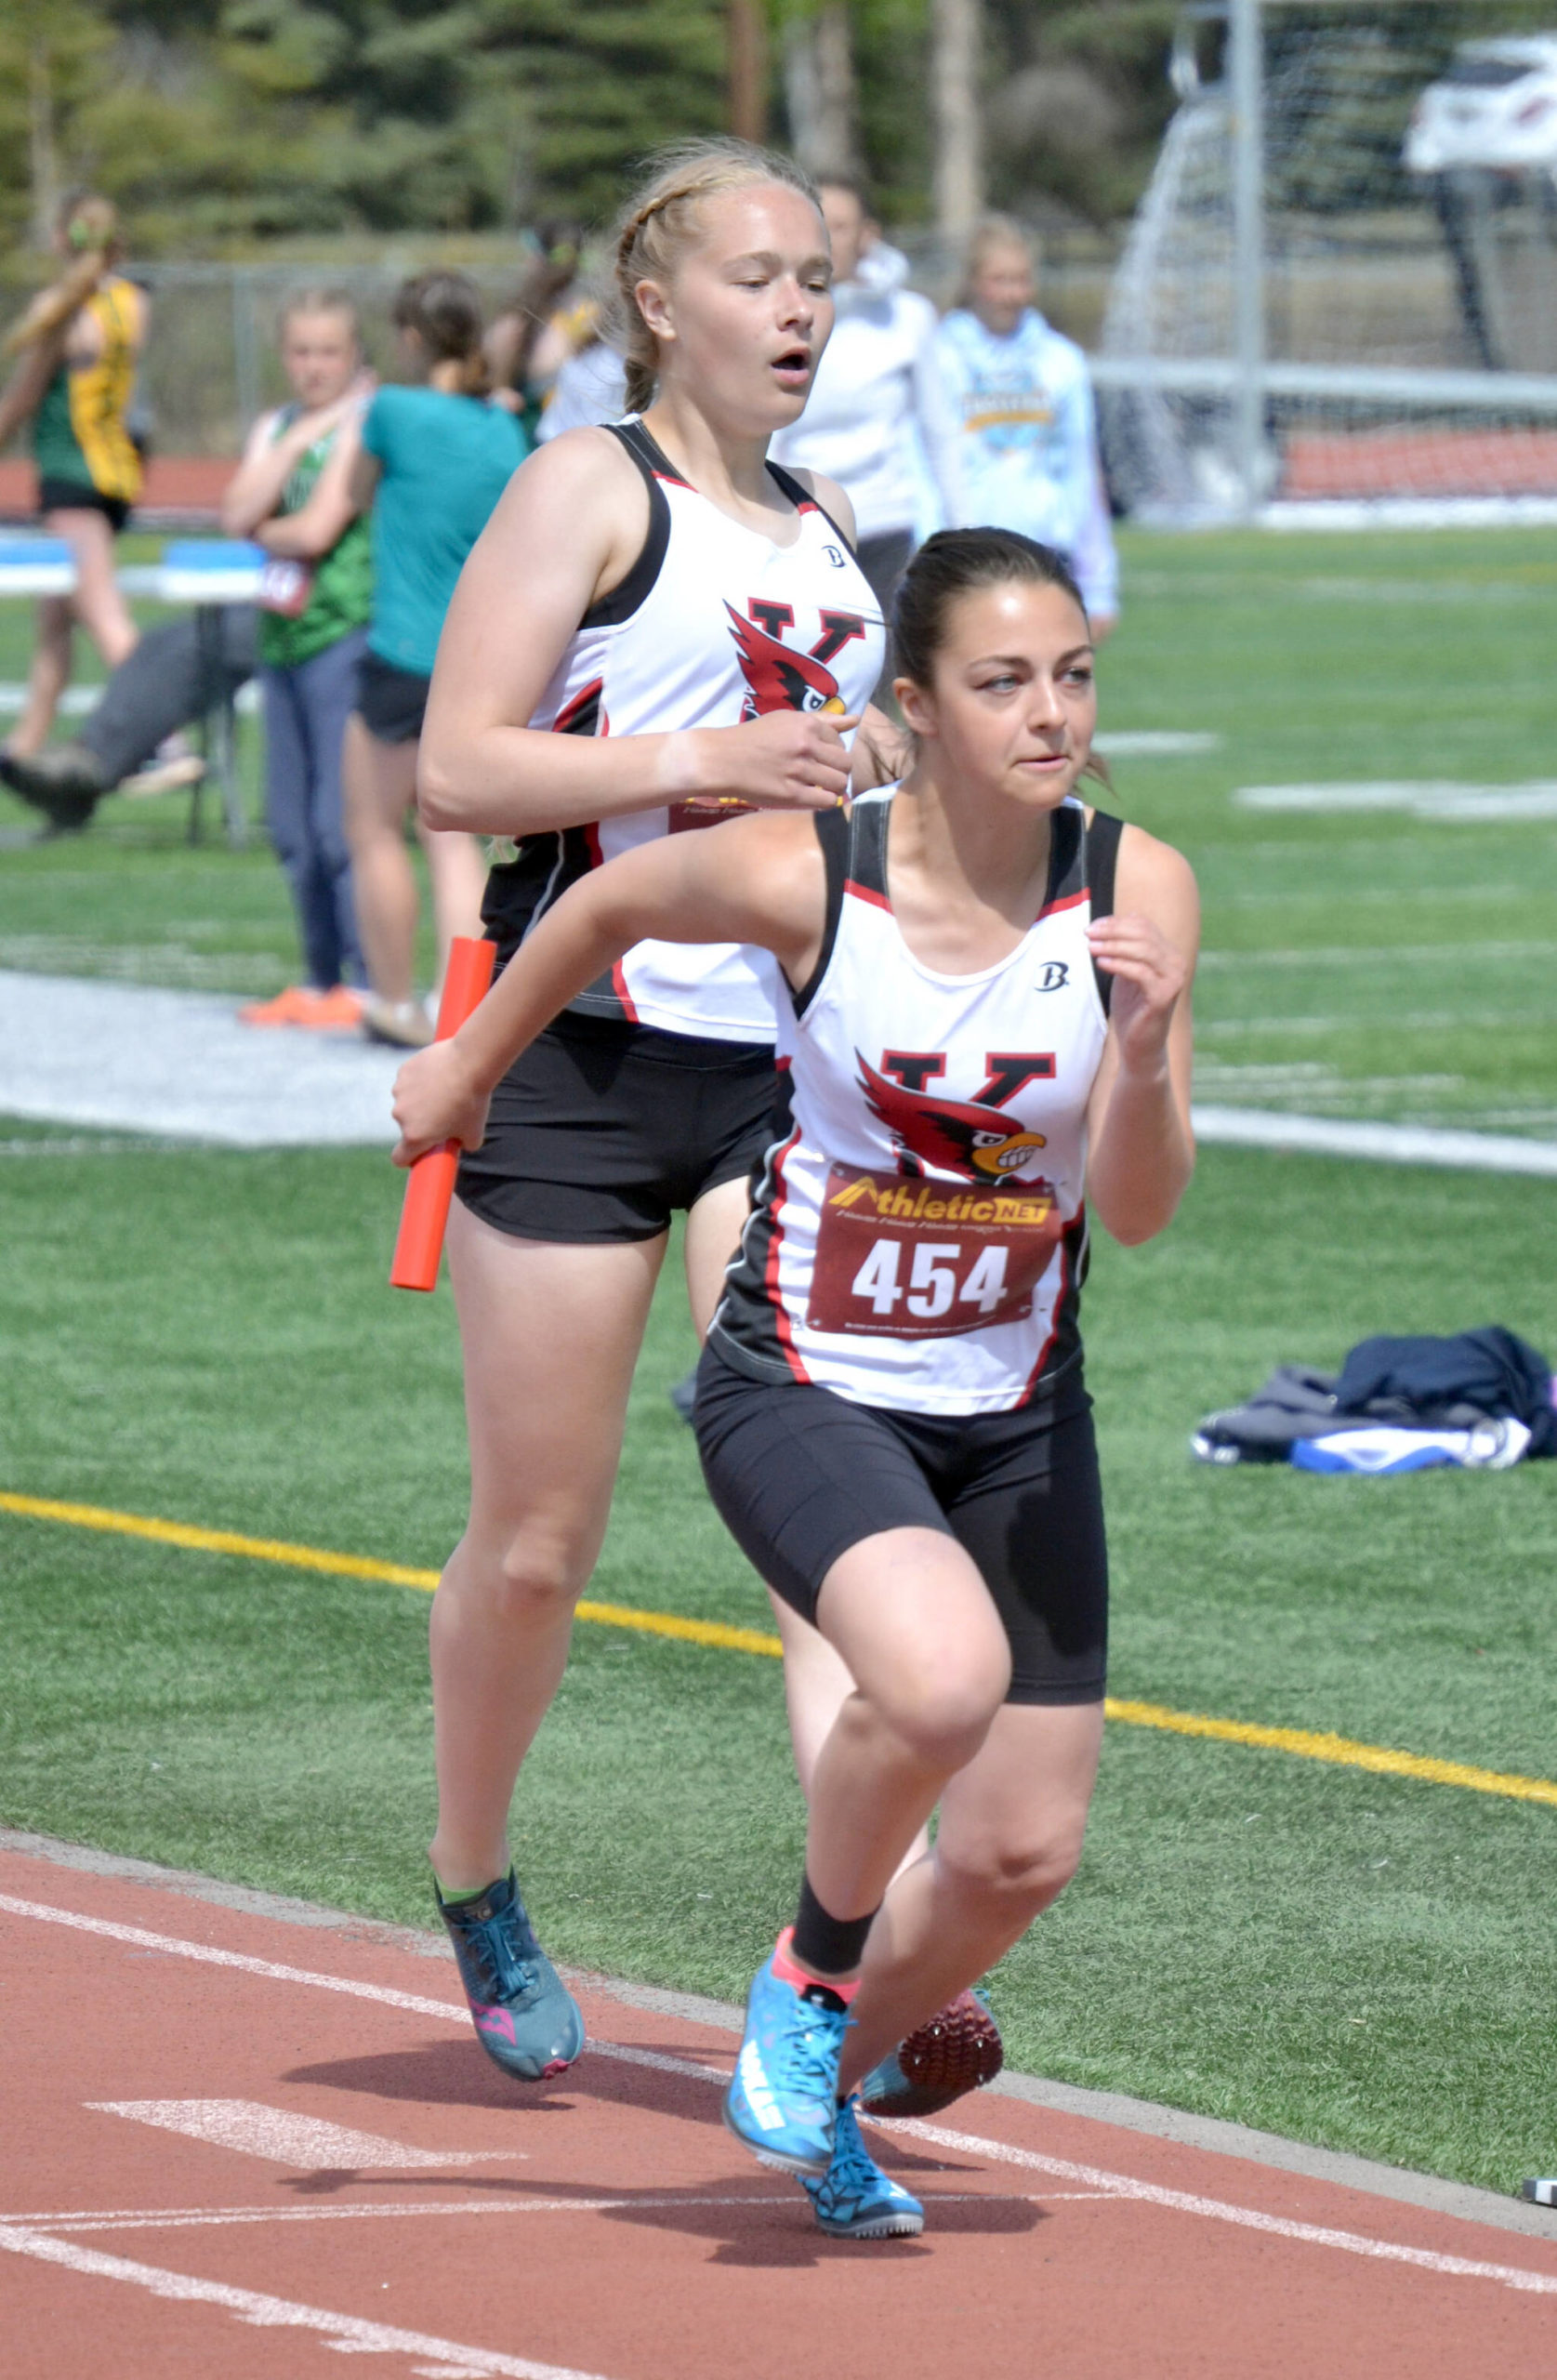 Emily Moss hands the baton to Summer Foster on the way to Kenai Central winning the 3,200-meter relay at the Region 3/Division II meet Saturday, May 21, 2022, at Ed Hollier Field at Kenai Central High School in Kenai, Alaska. (Photo by Jeff Helminiak/Peninsula Clarion)